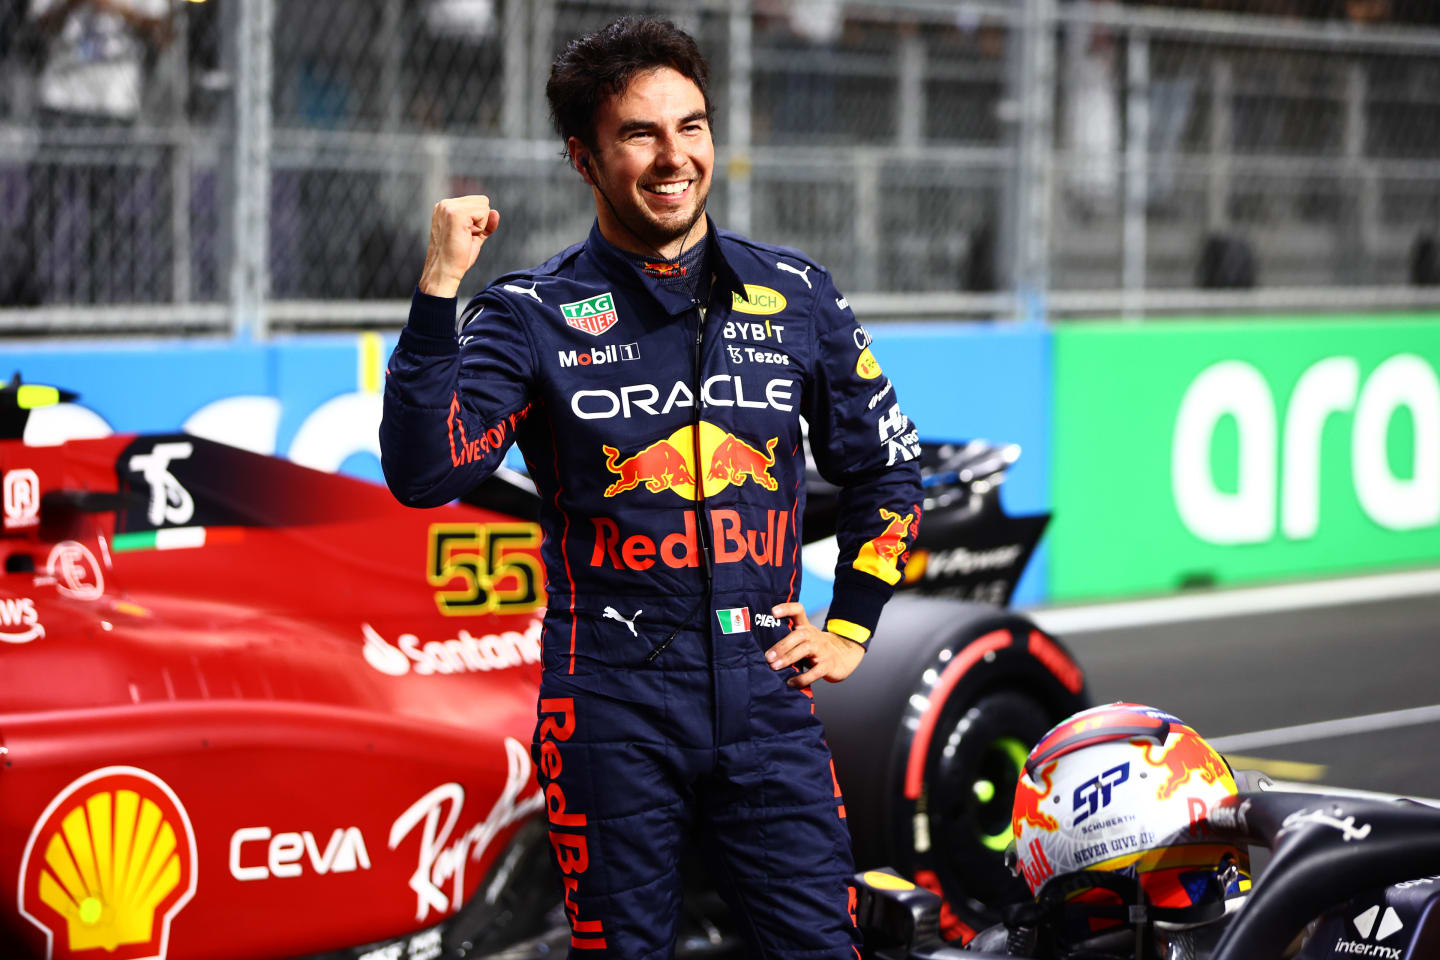 JEDDAH, SAUDI ARABIA - MARCH 26: Pole position qualifier Sergio Perez of Mexico and Oracle Red Bull Racing celebrates in parc ferme during qualifying ahead of the F1 Grand Prix of Saudi Arabia at the Jeddah Corniche Circuit on March 26, 2022 in Jeddah, Saudi Arabia. (Photo by Mark Thompson/Getty Images)